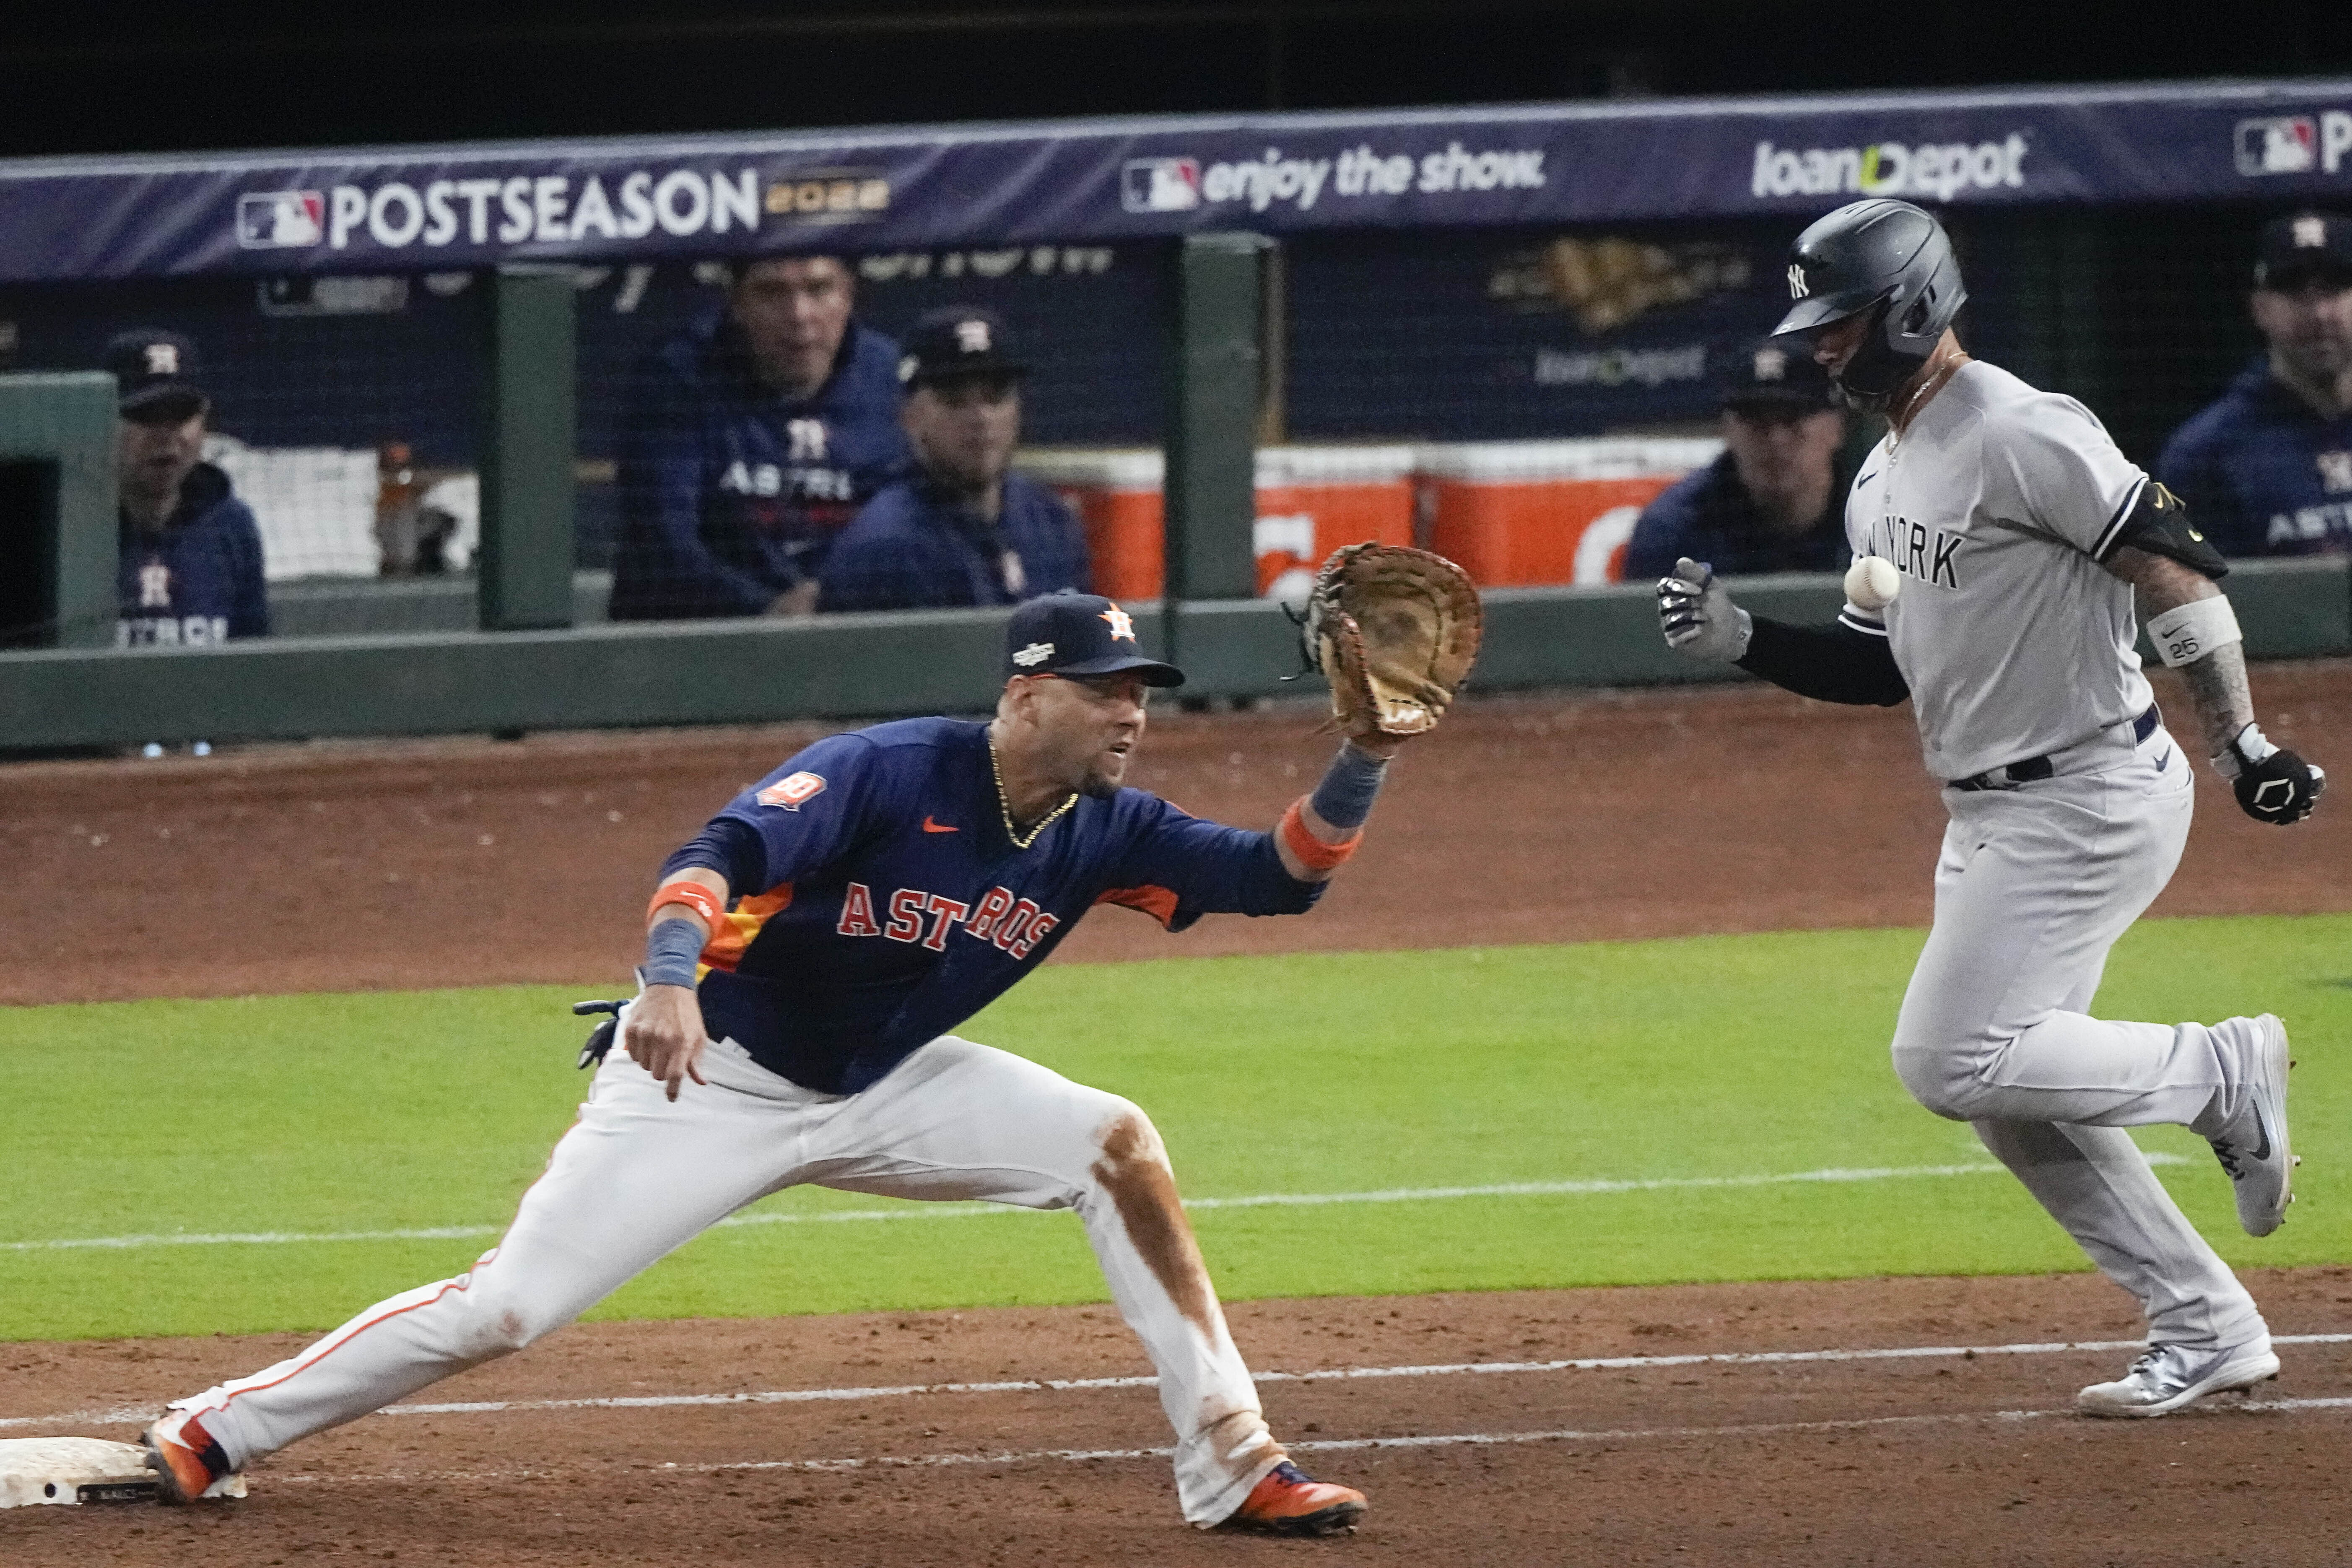 Yankees lose 3-2 to Astros in 11 innings in Game 2 of ALCS - ABC7